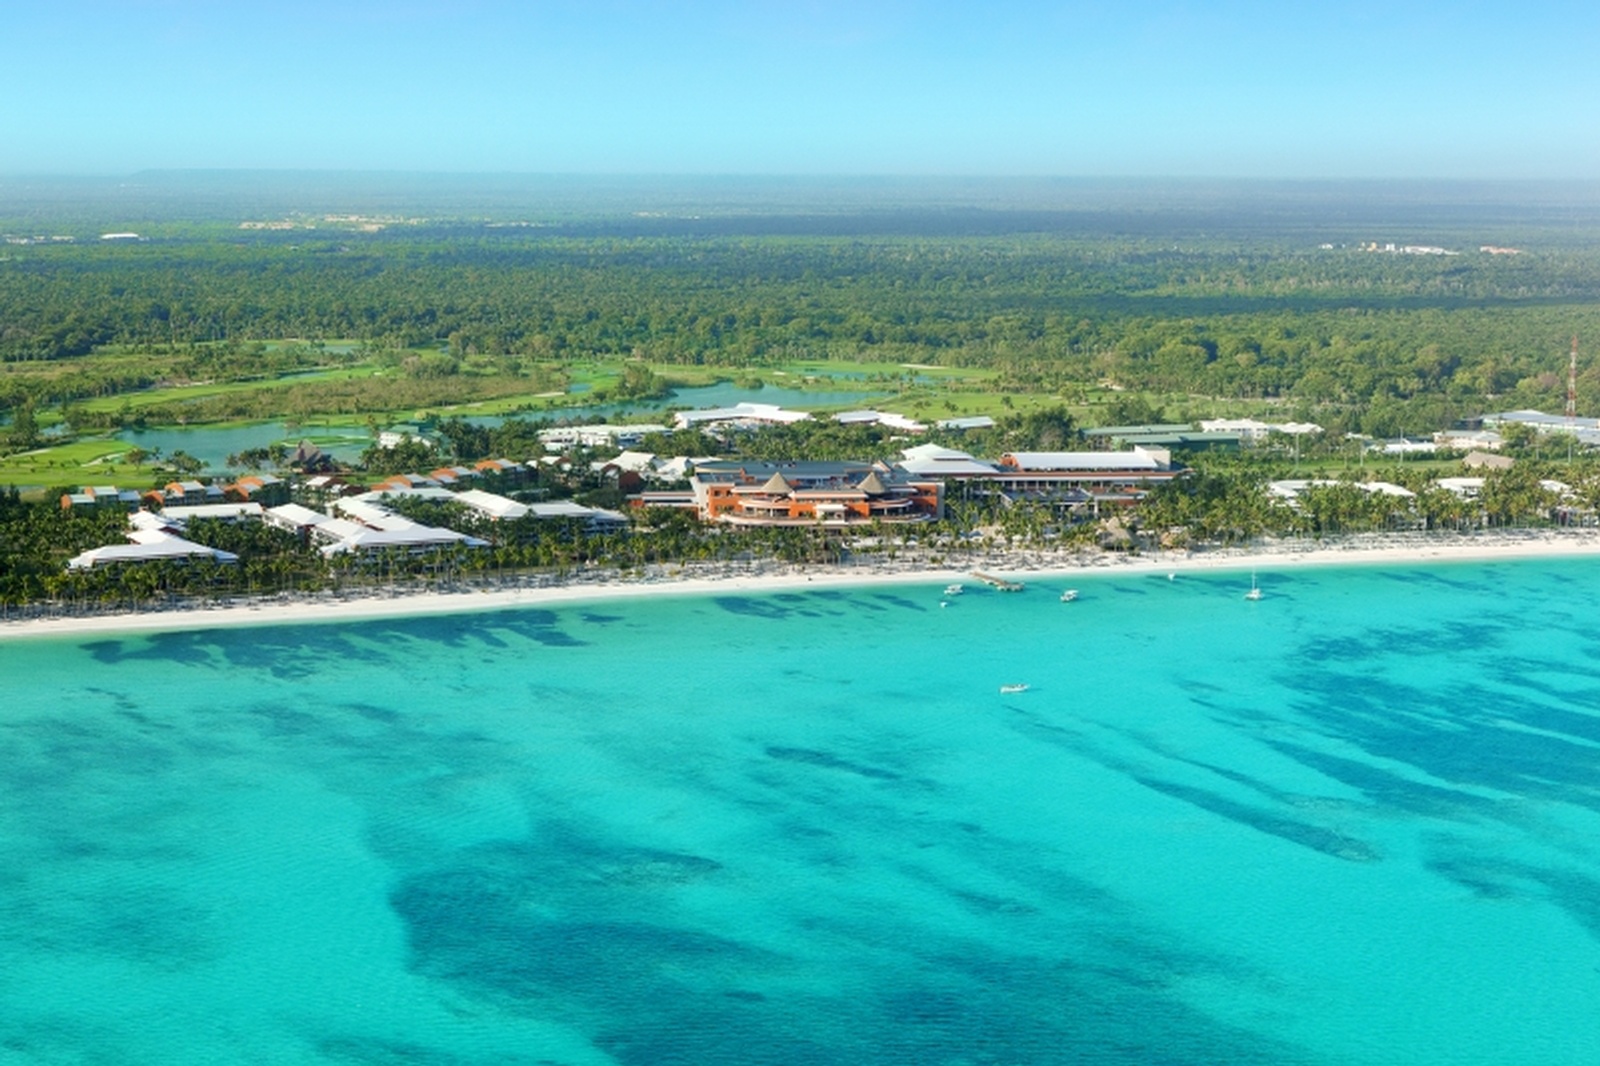 Destination Wedding Packages to Barcelo Maya Palace Beach